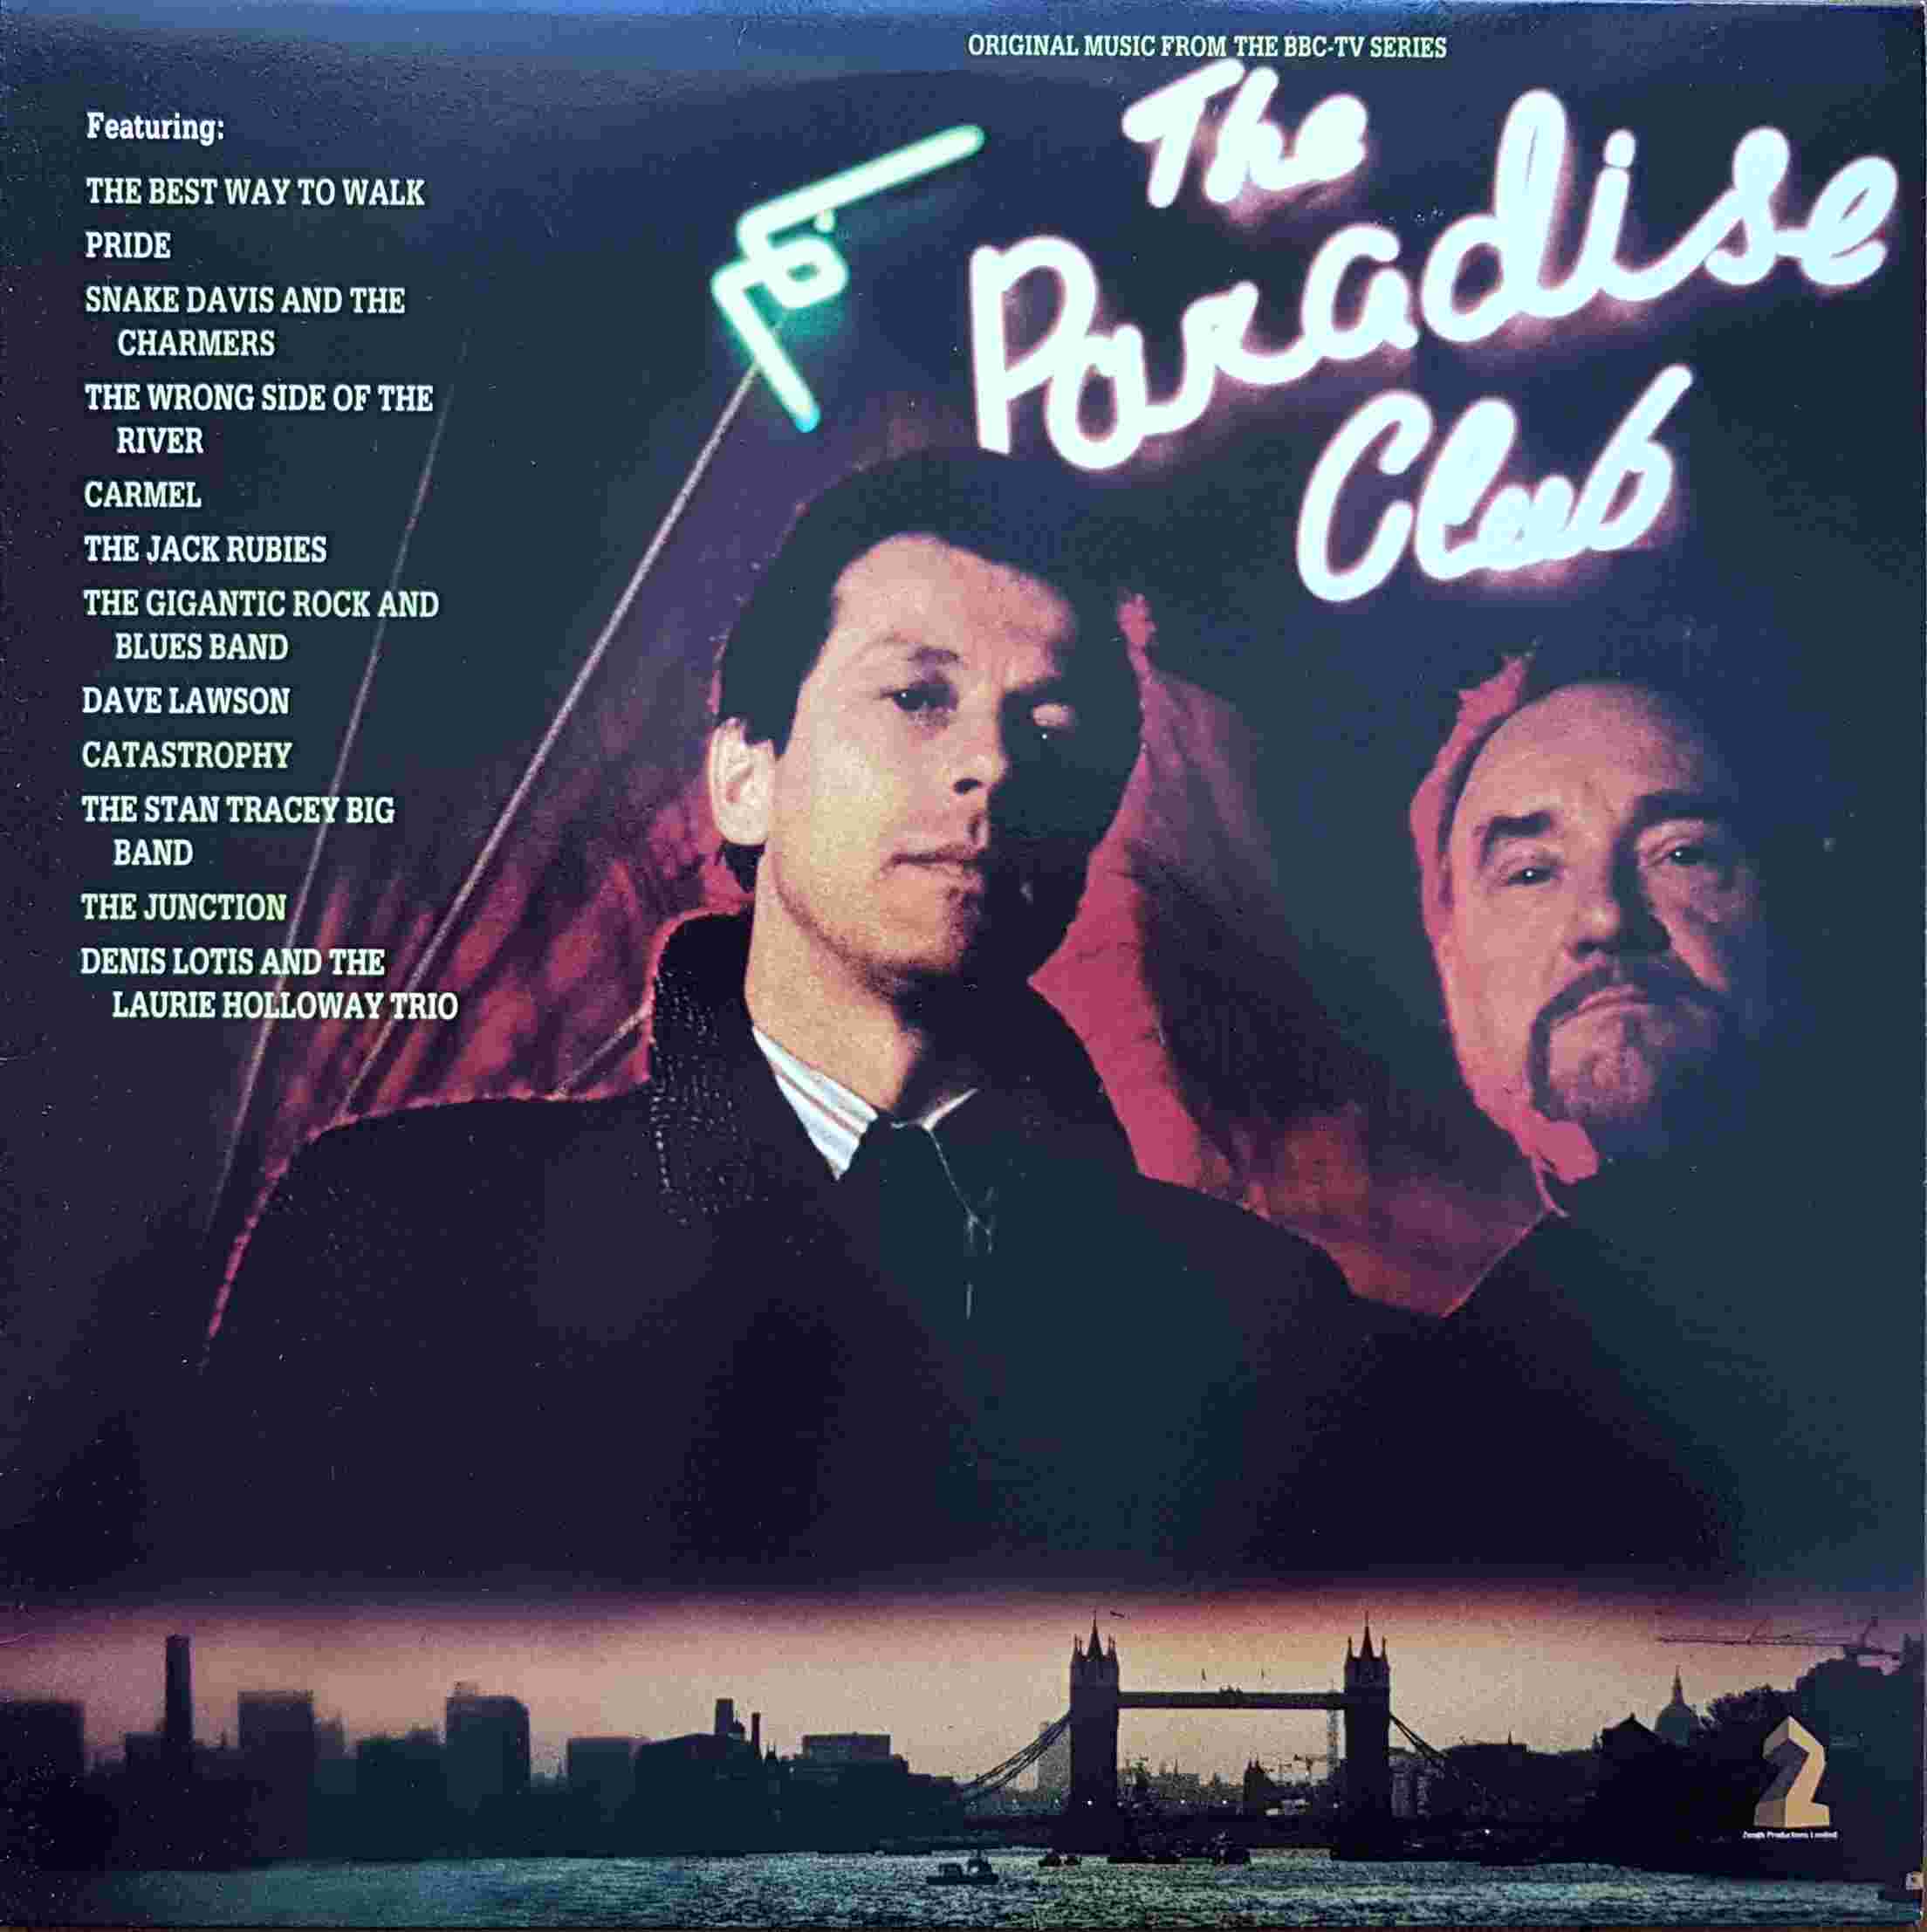 Picture of REB 764 The Paradise Club by artist Various from the BBC albums - Records and Tapes library